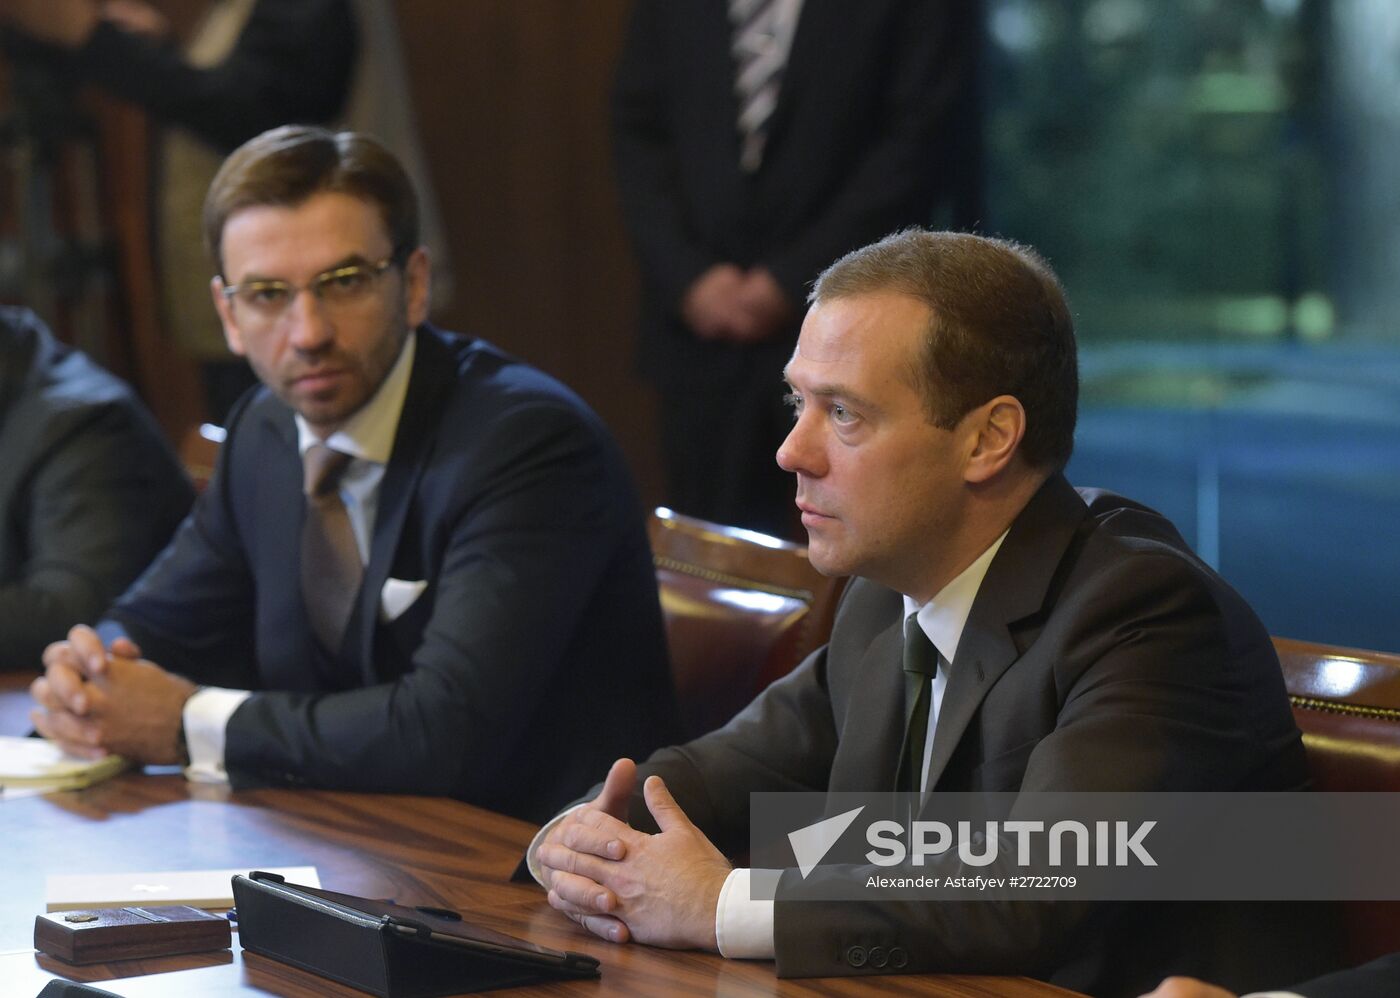 Prime Minister Dmitry Medvedev meets with members of Government Expert Council